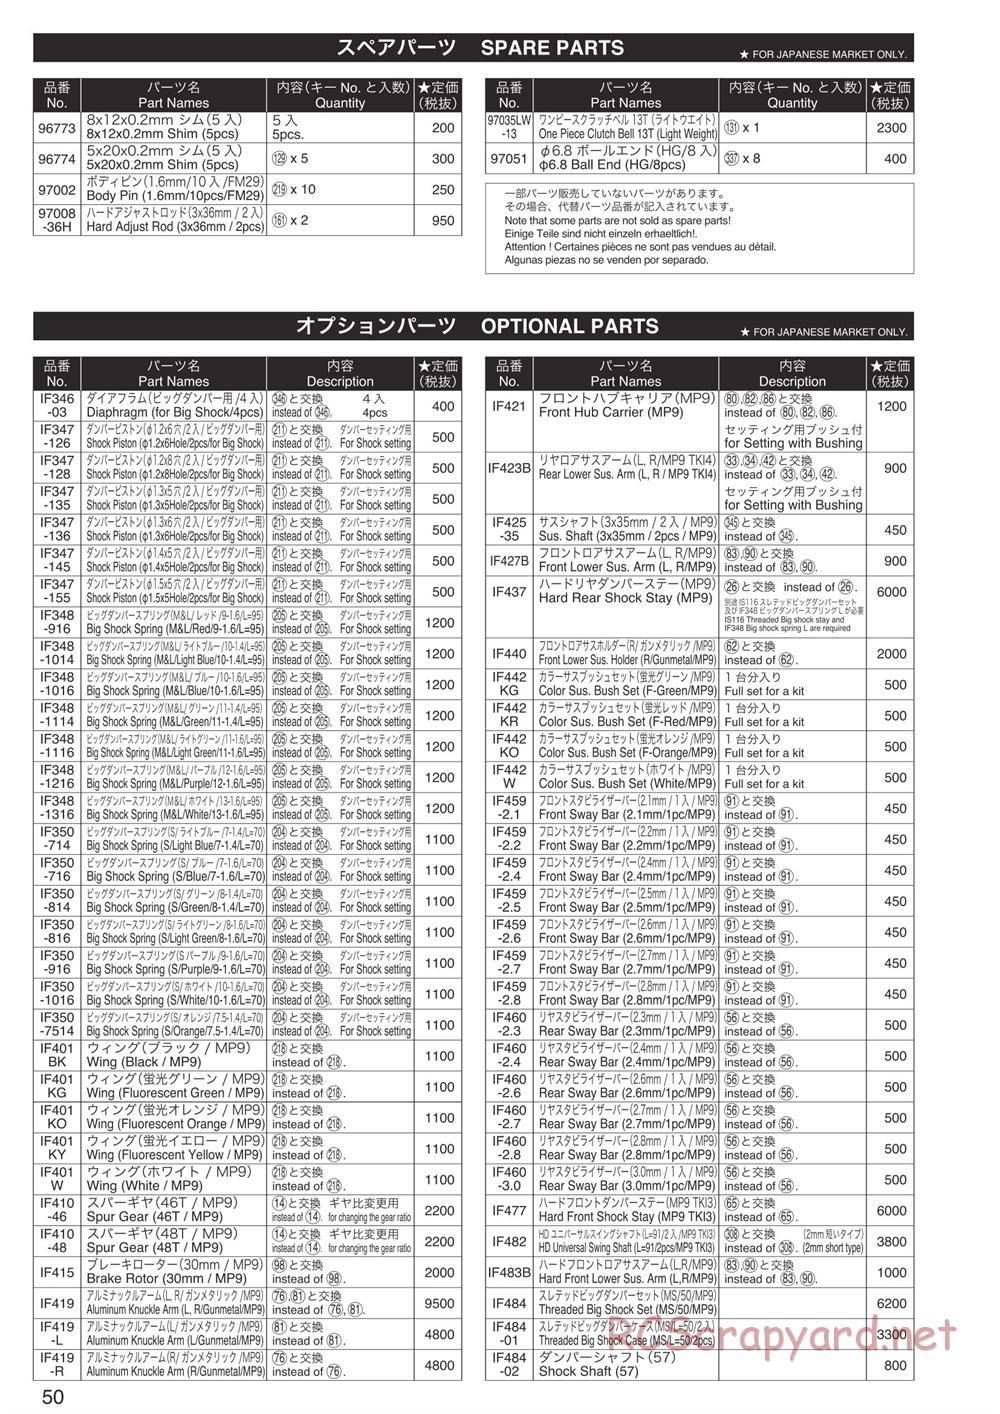 Kyosho - Inferno MP9 TKI4 10th Anniversary Special Edition - Parts List - Page 3